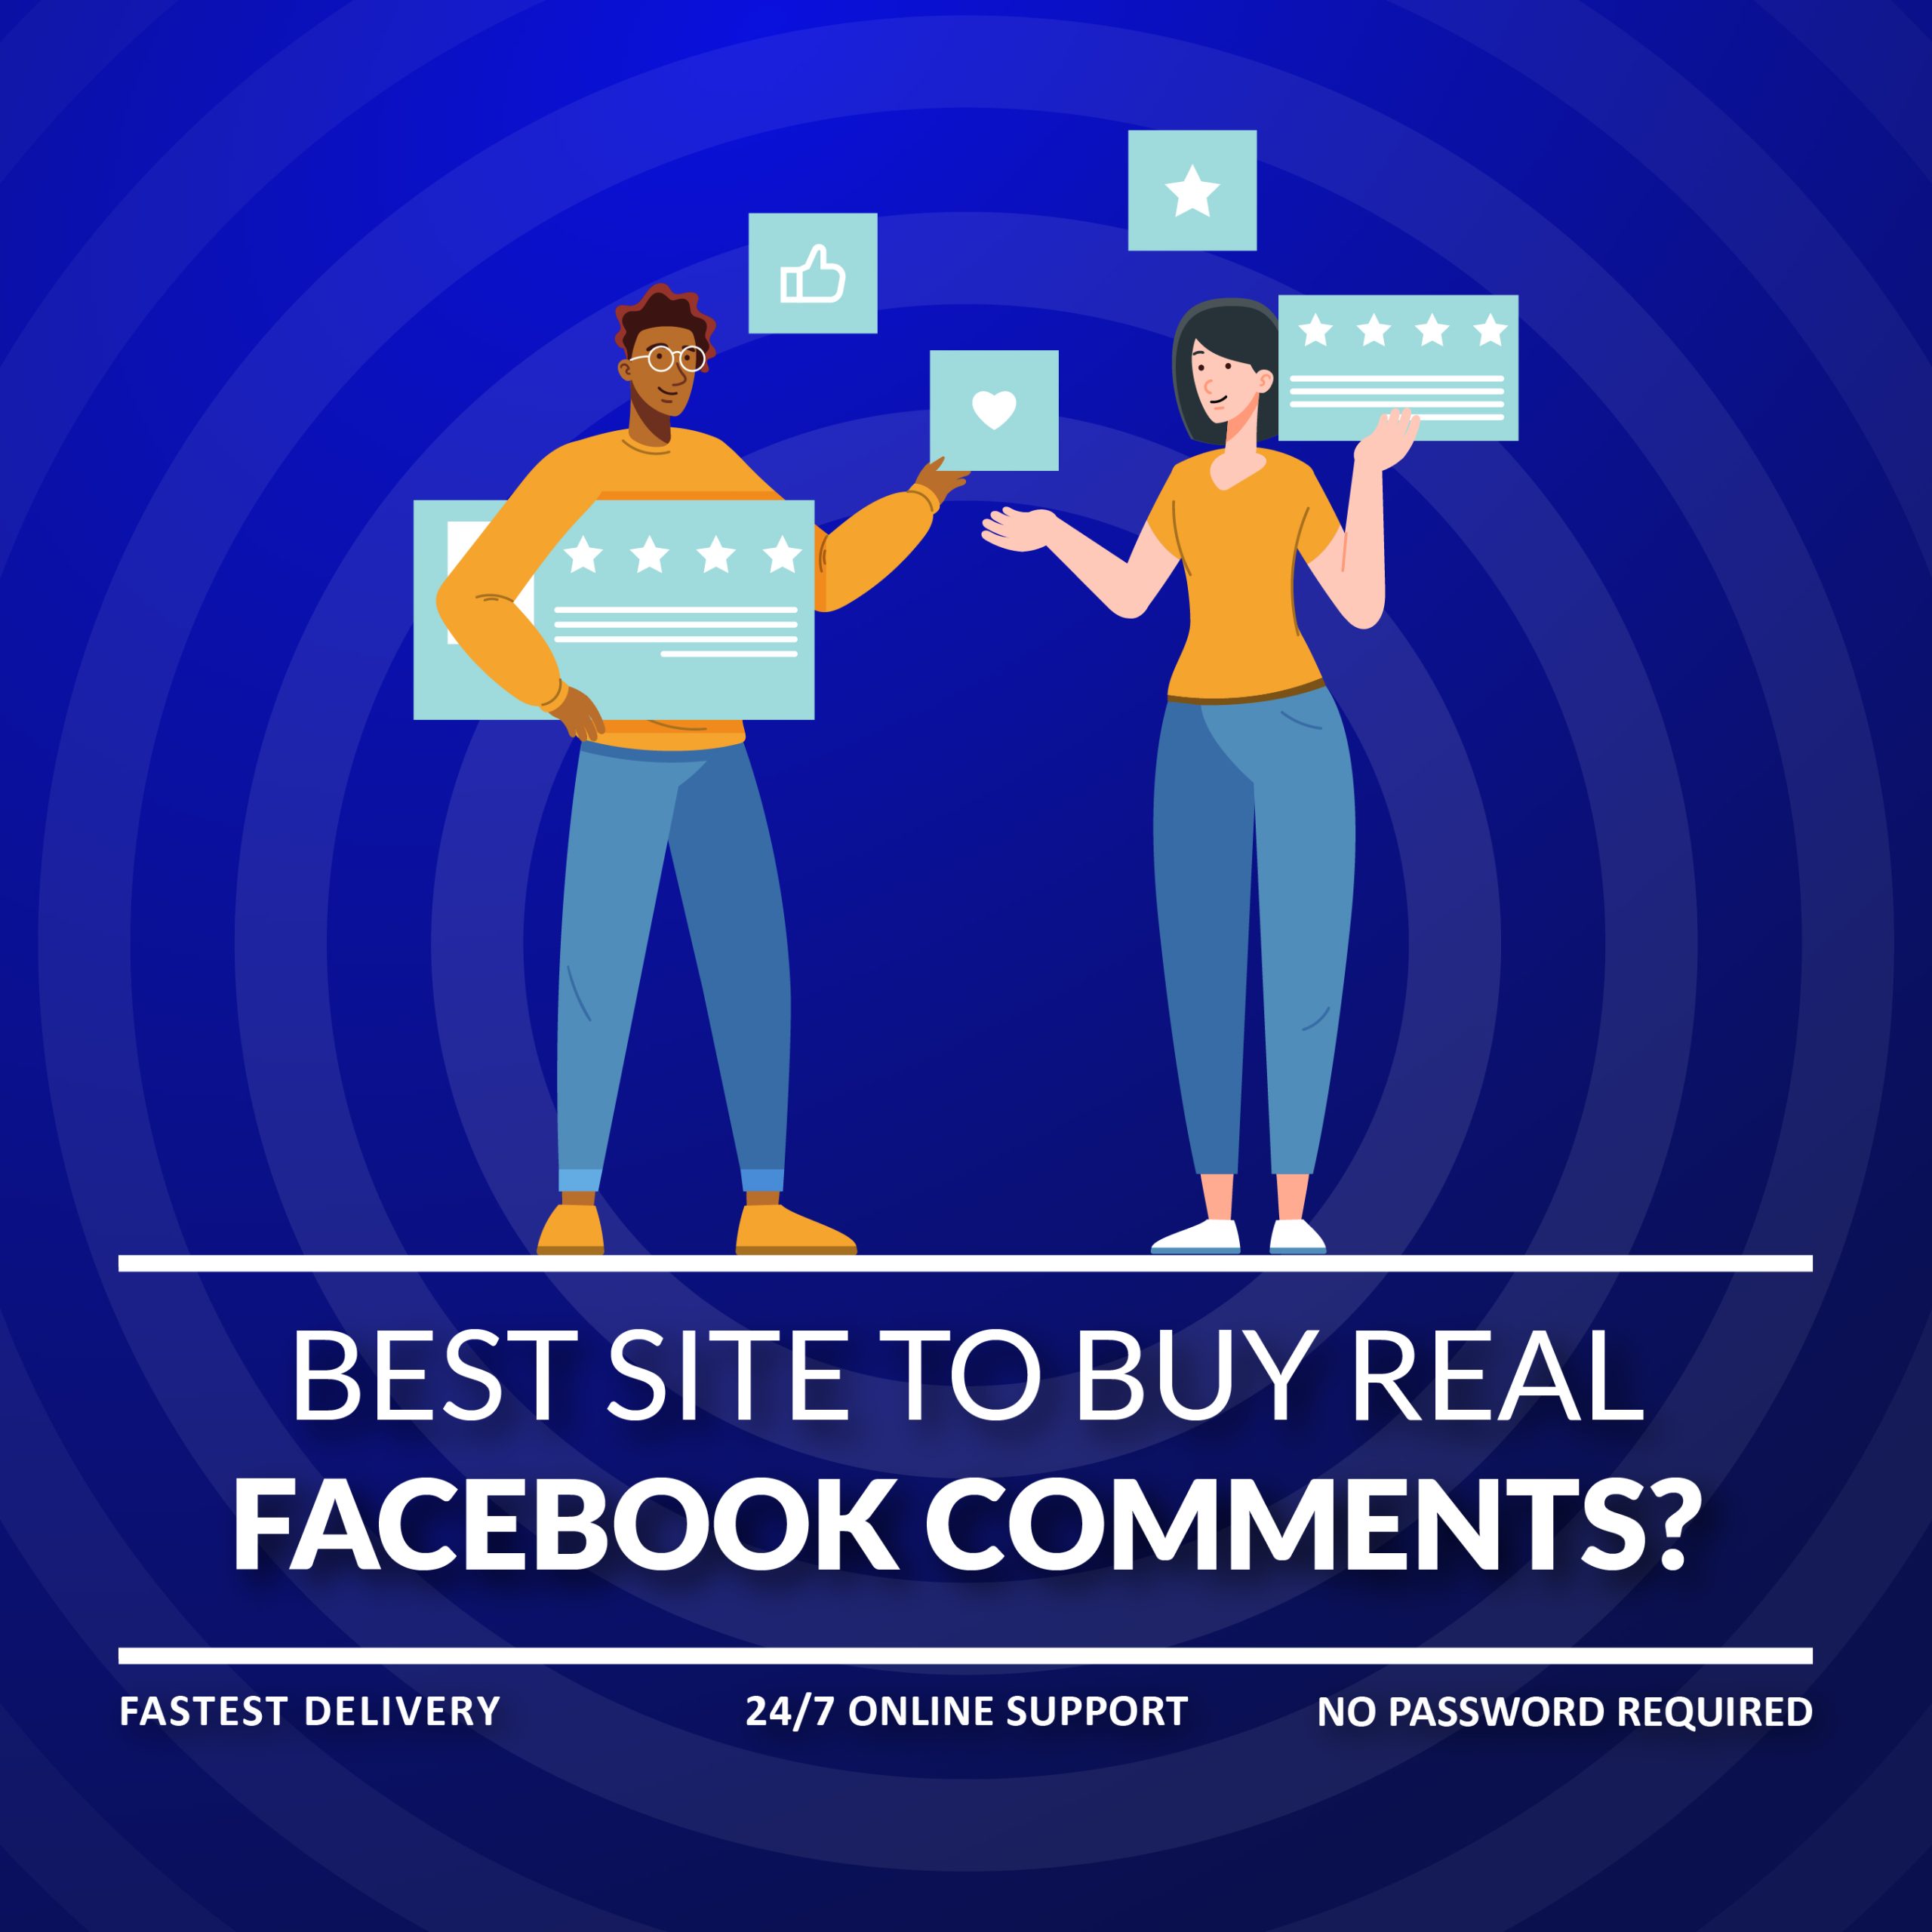 Best Site to Buy Real Facebook Comments?